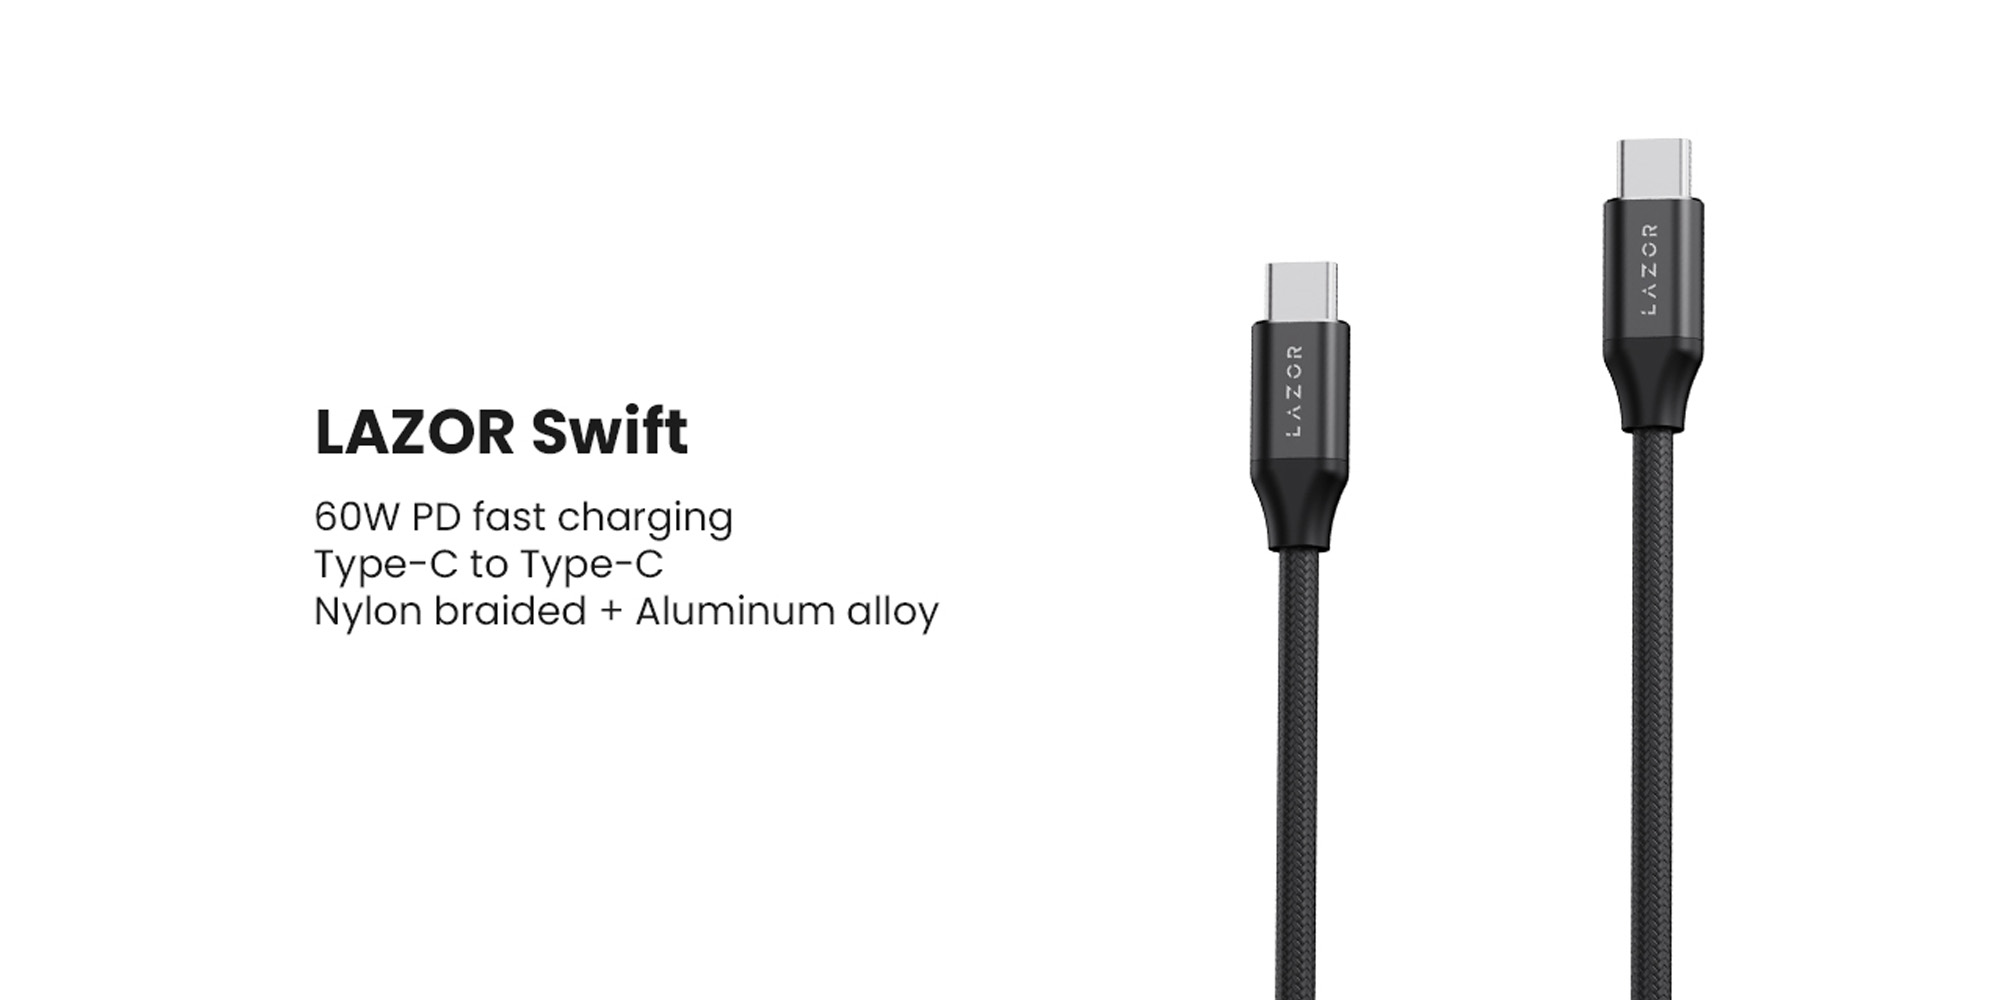 LAZOR Swift CT29: Type-C to Type-C 60W PD Fast Charging Cable, 196 Copper Wire Wrapped, White Gold-Plated Connector, Strong Kevlar Material - 3M, Black